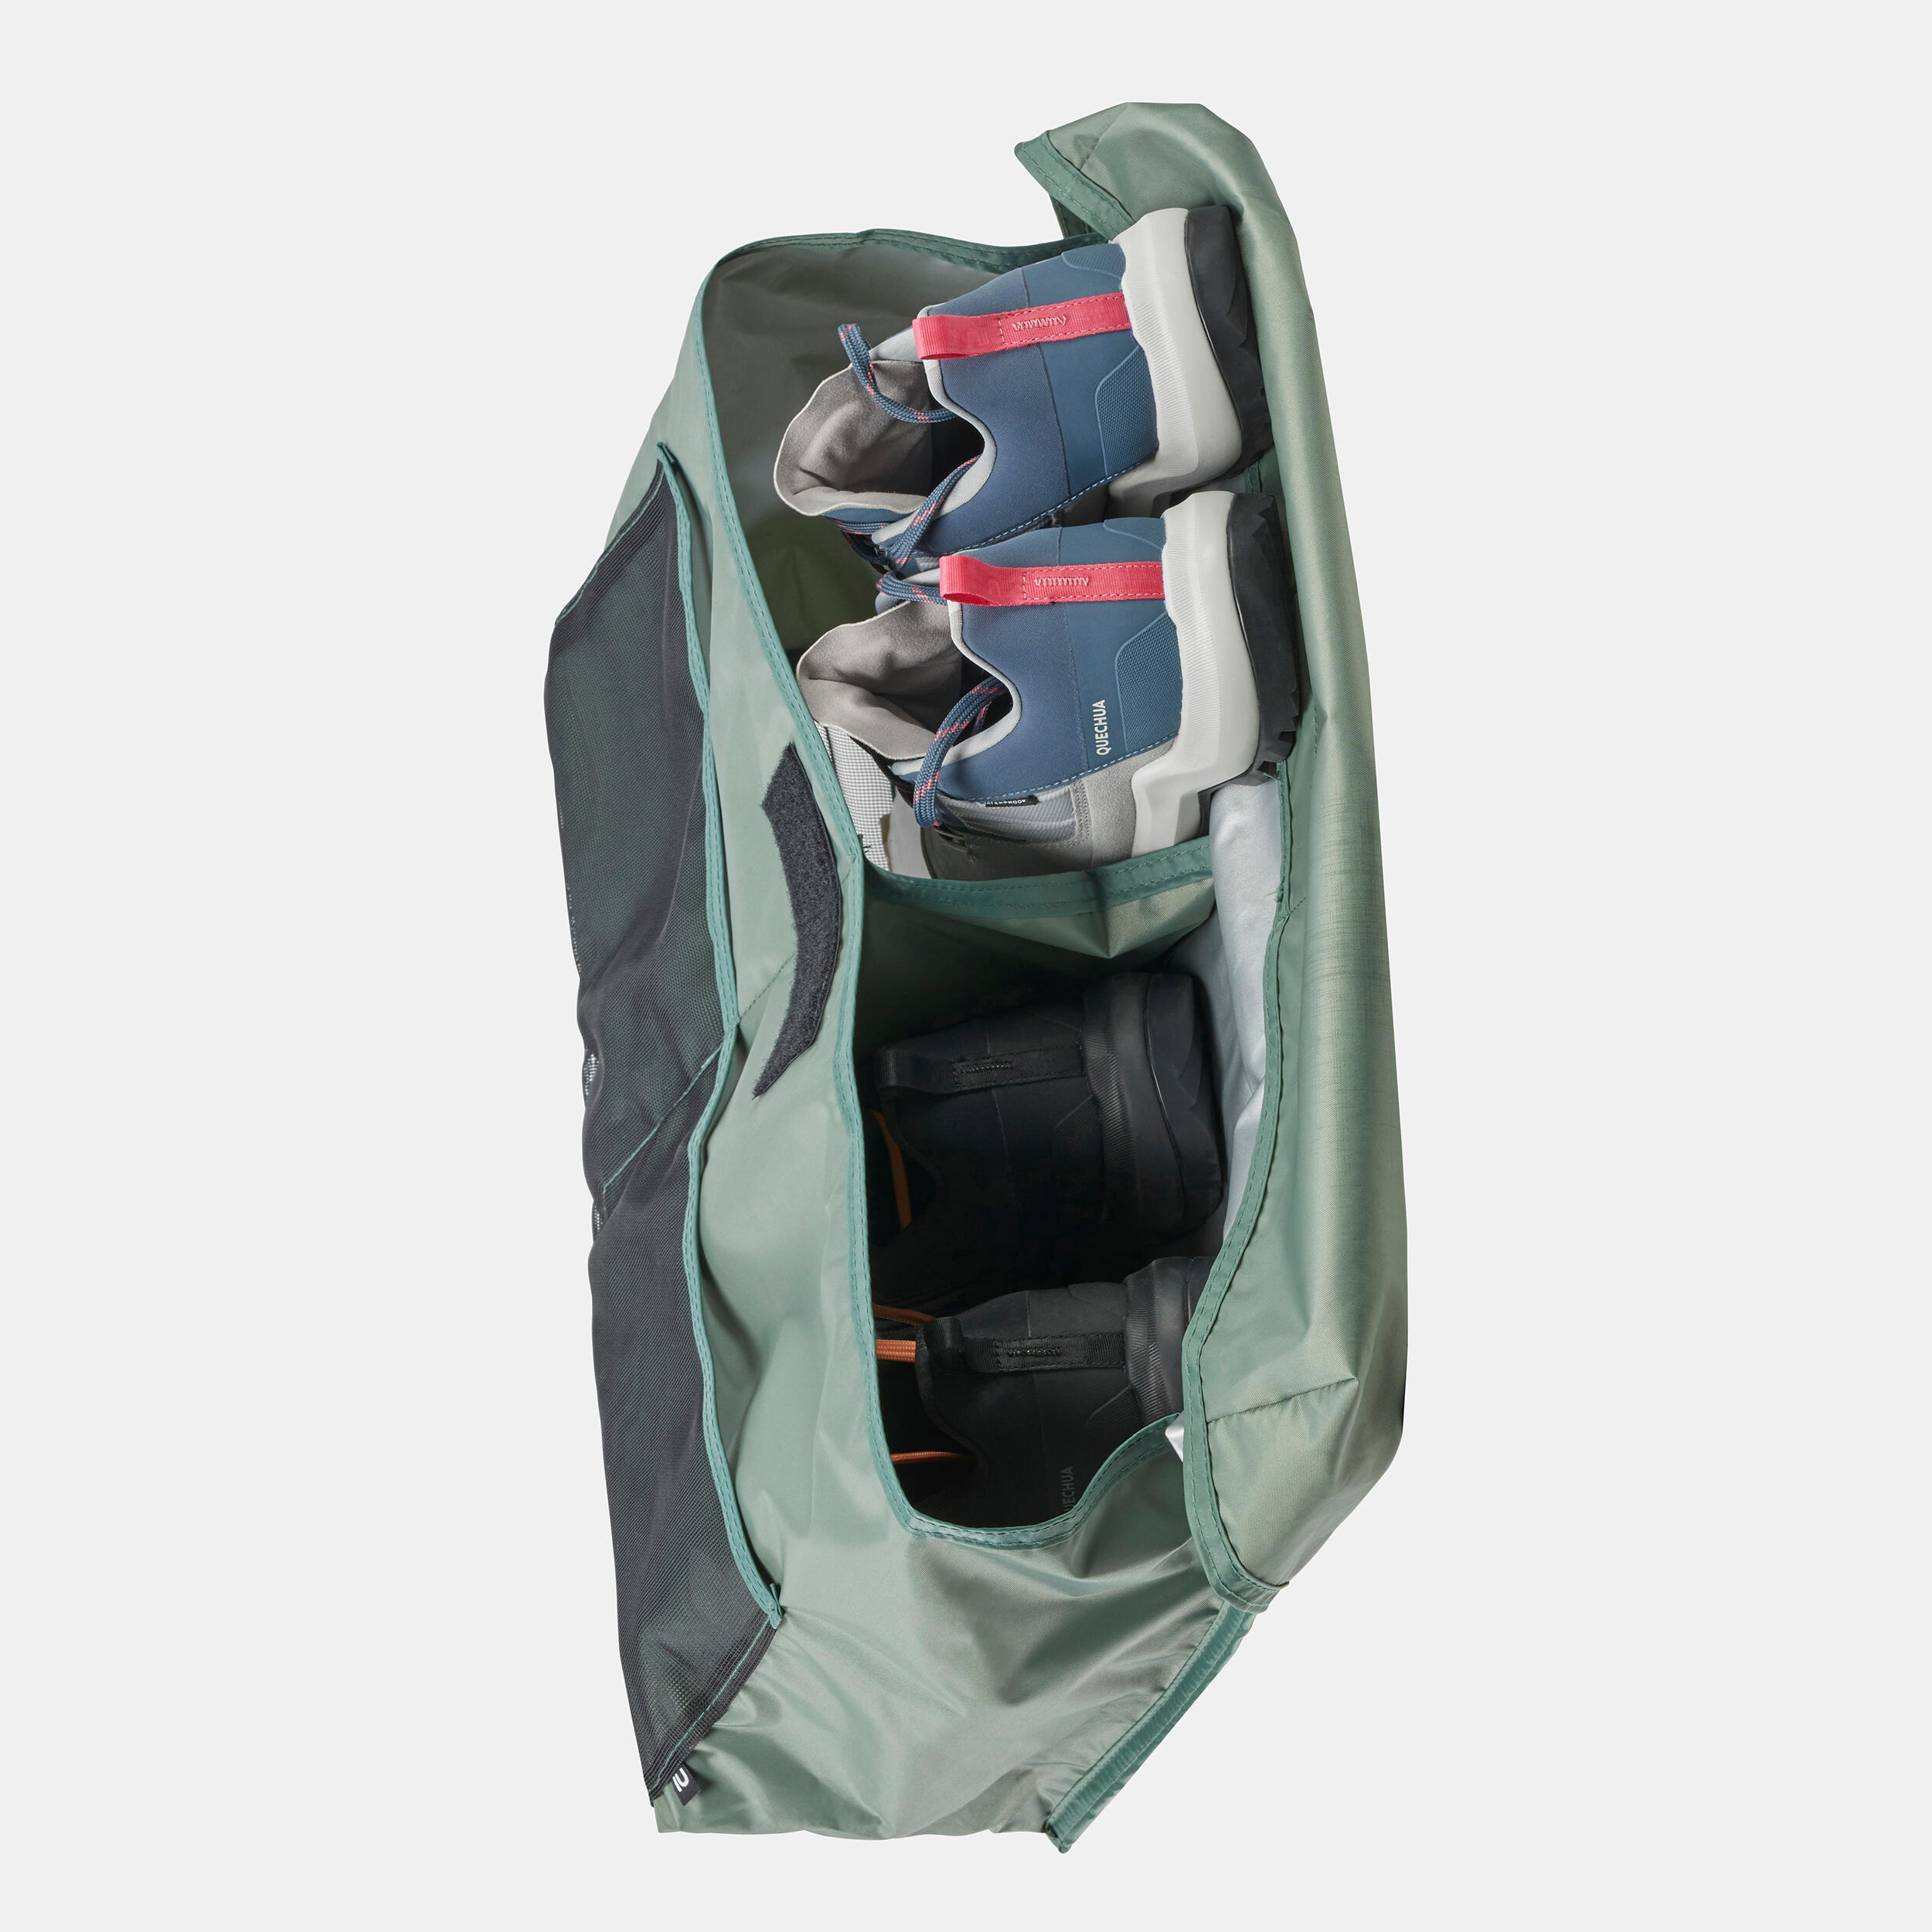 Removable Shoe Pocket for MH500 2p Tent 4/4